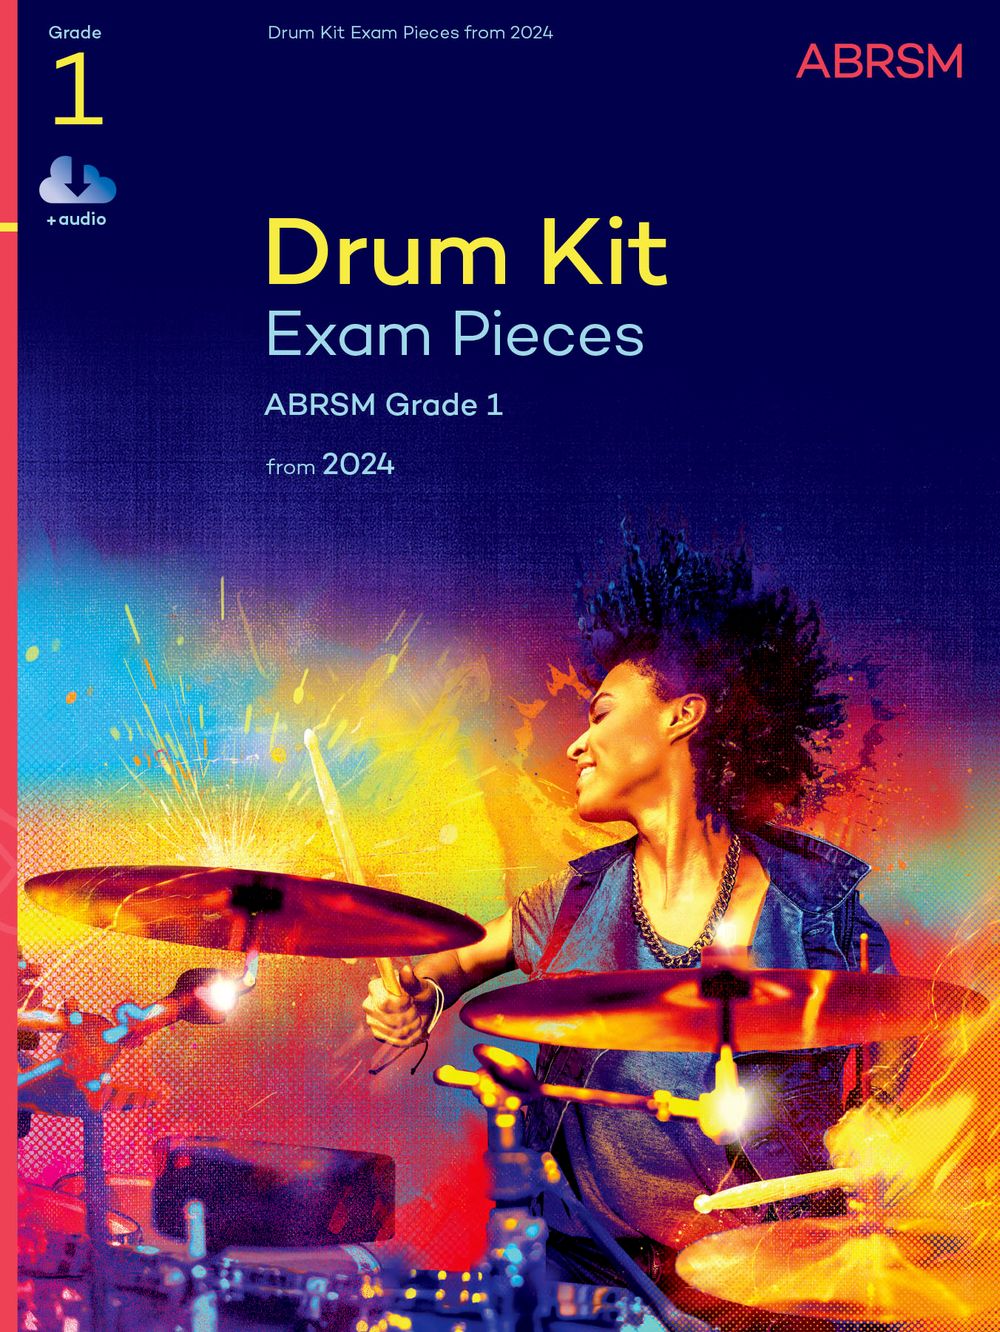 Drum Kit Exam Pieces From 2024 Grade 1 Abrsm Sheet Music Songbook